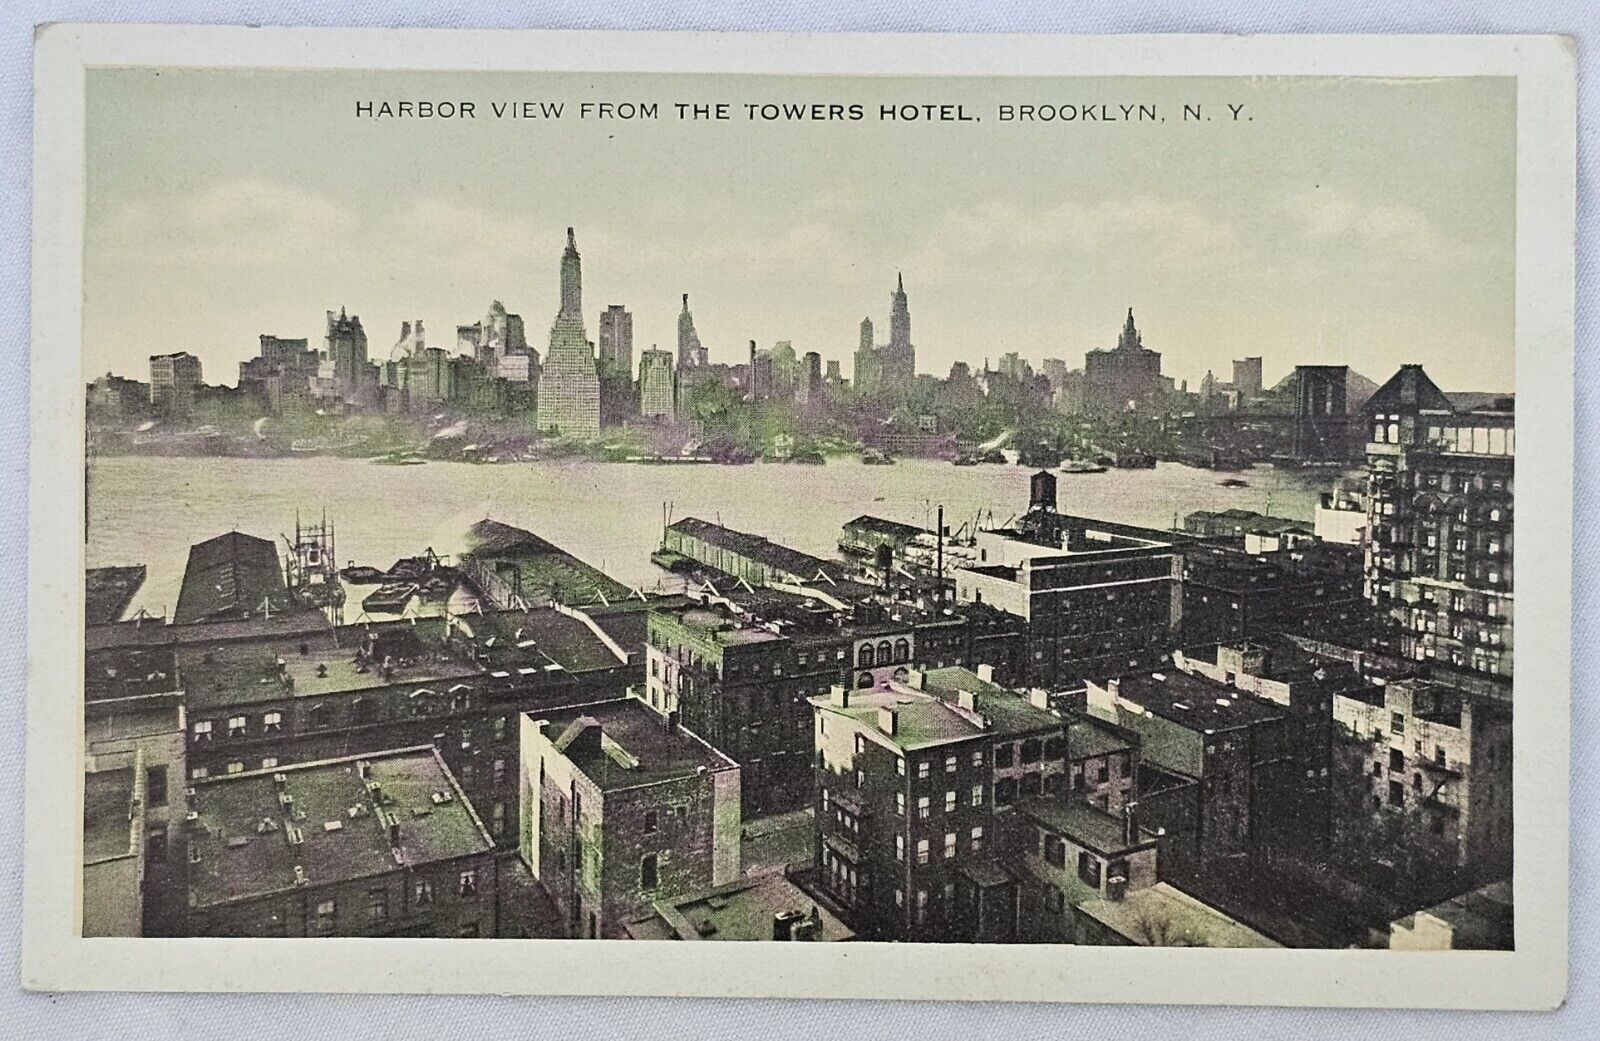 Brooklyn New York Towers Hotel Postcard Elevation Harbor View Hand-Color Skyline